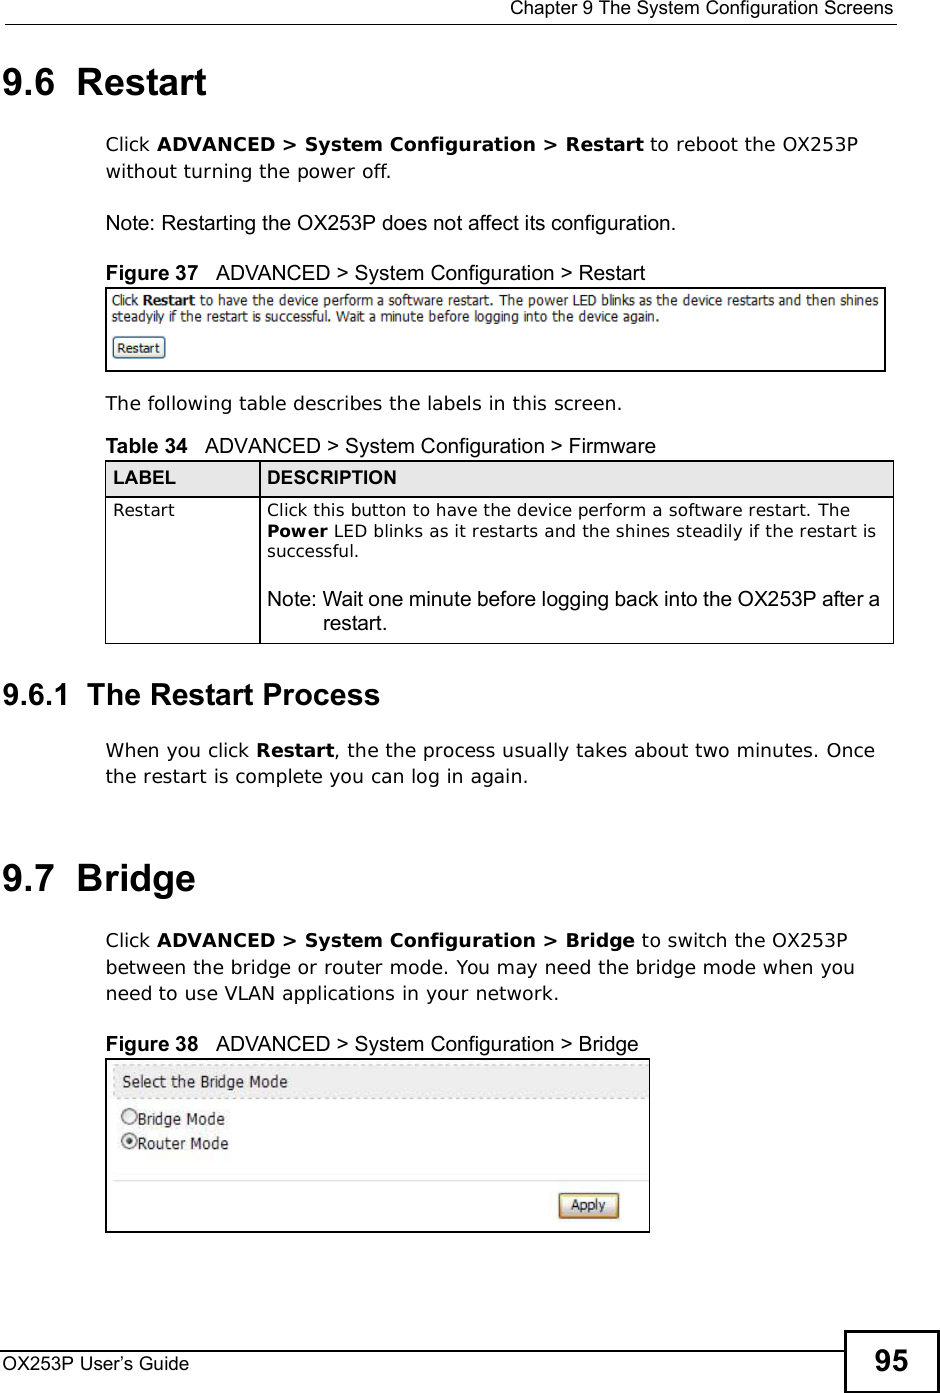  Chapter 9The System Configuration ScreensOX253P User’s Guide 959.6  RestartClick ADVANCED &gt; System Configuration &gt; Restart to reboot the OX253P without turning the power off.Note: Restarting the OX253P does not affect its configuration.Figure 37   ADVANCED &gt; System Configuration &gt; RestartThe following table describes the labels in this screen.    9.6.1  The Restart Process When you click Restart, the the process usually takes about two minutes. Once the restart is complete you can log in again.9.7  BridgeClick ADVANCED &gt; System Configuration &gt; Bridge to switch the OX253P between the bridge or router mode. You may need the bridge mode when you need to use VLAN applications in your network.Figure 38   ADVANCED &gt; System Configuration &gt; BridgeTable 34   ADVANCED &gt; System Configuration &gt; FirmwareLABEL DESCRIPTIONRestart Click this button to have the device perform a software restart. The Power LED blinks as it restarts and the shines steadily if the restart is successful.Note: Wait one minute before logging back into the OX253P after a restart.